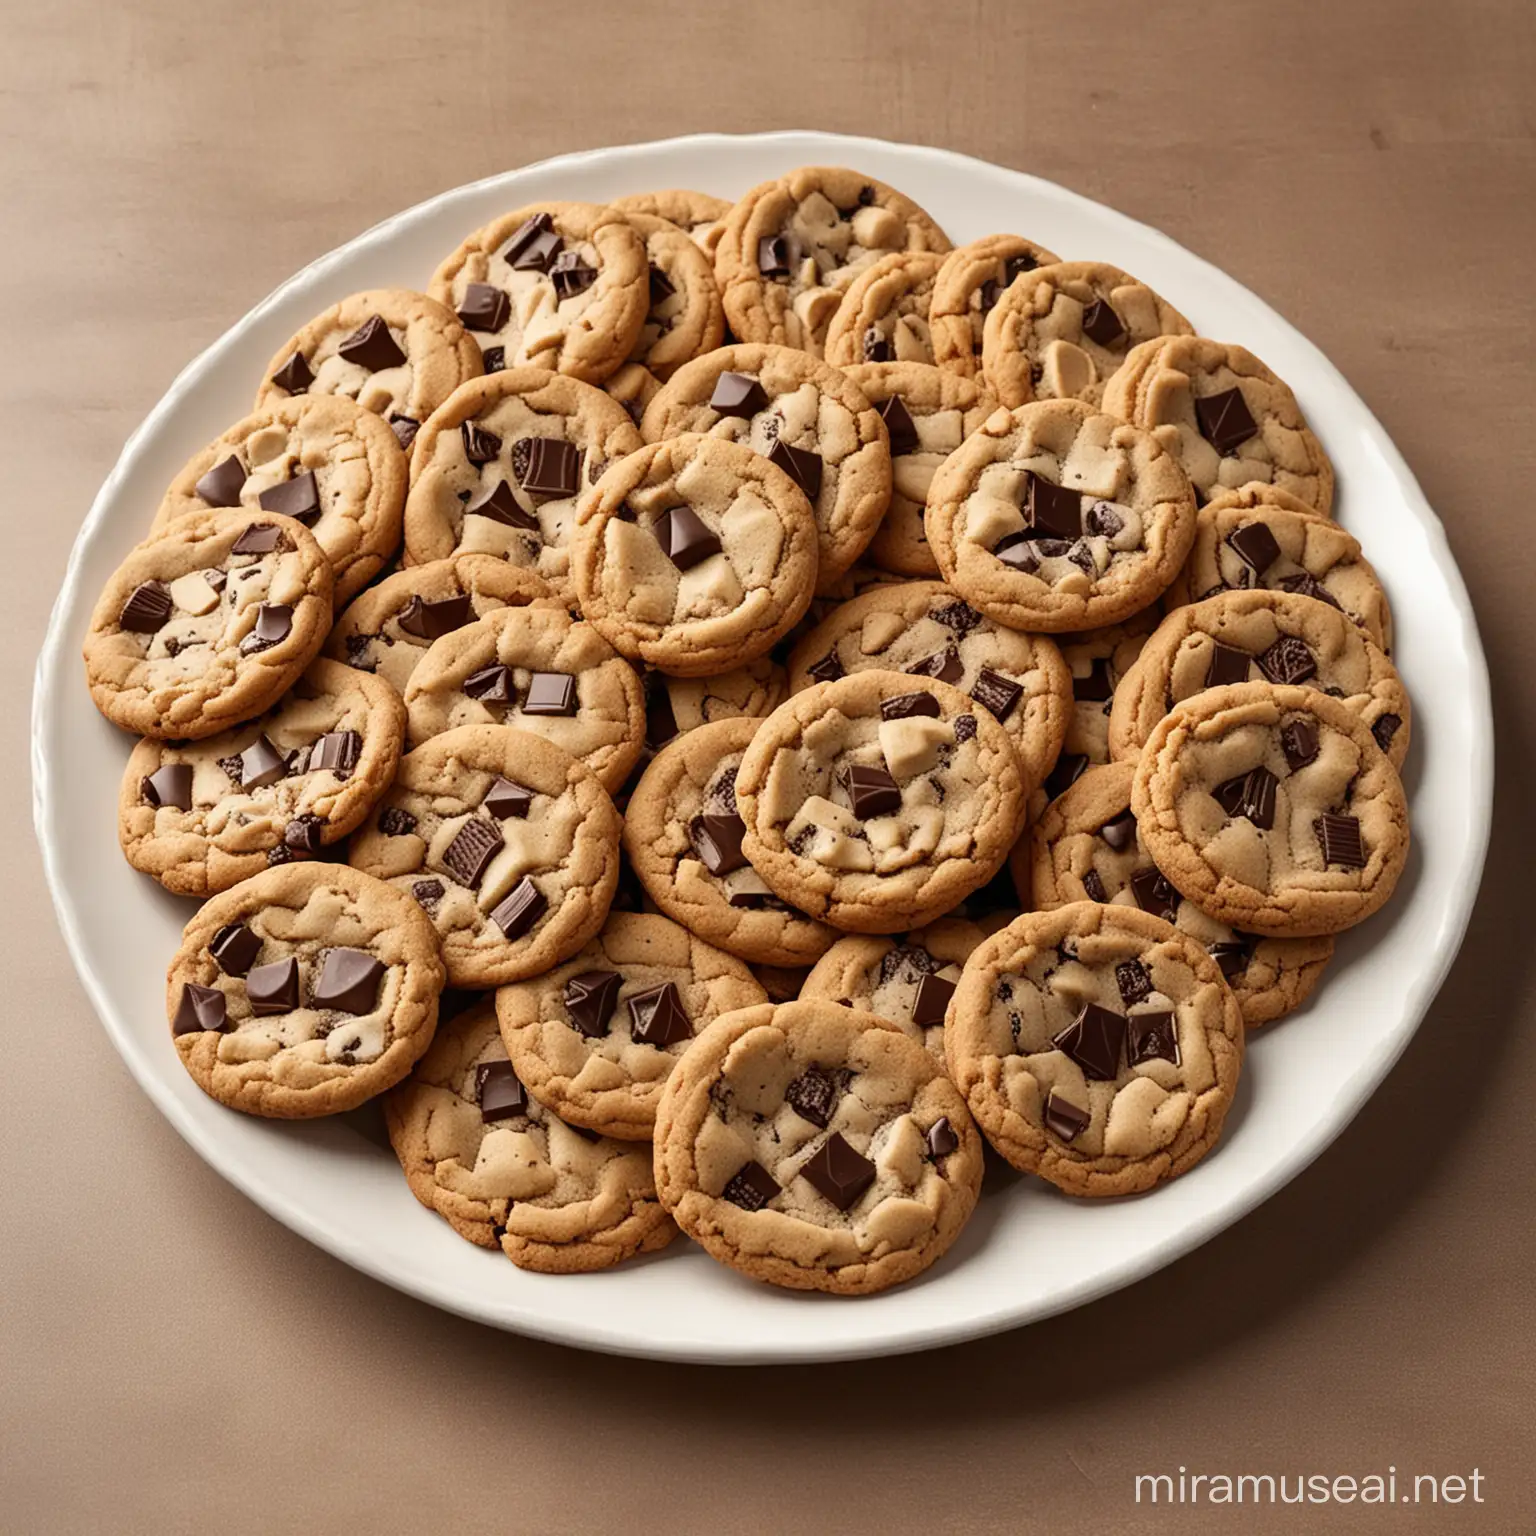 Delicious Toasted Cookies with Dark Chocolate Chunks on White Plate